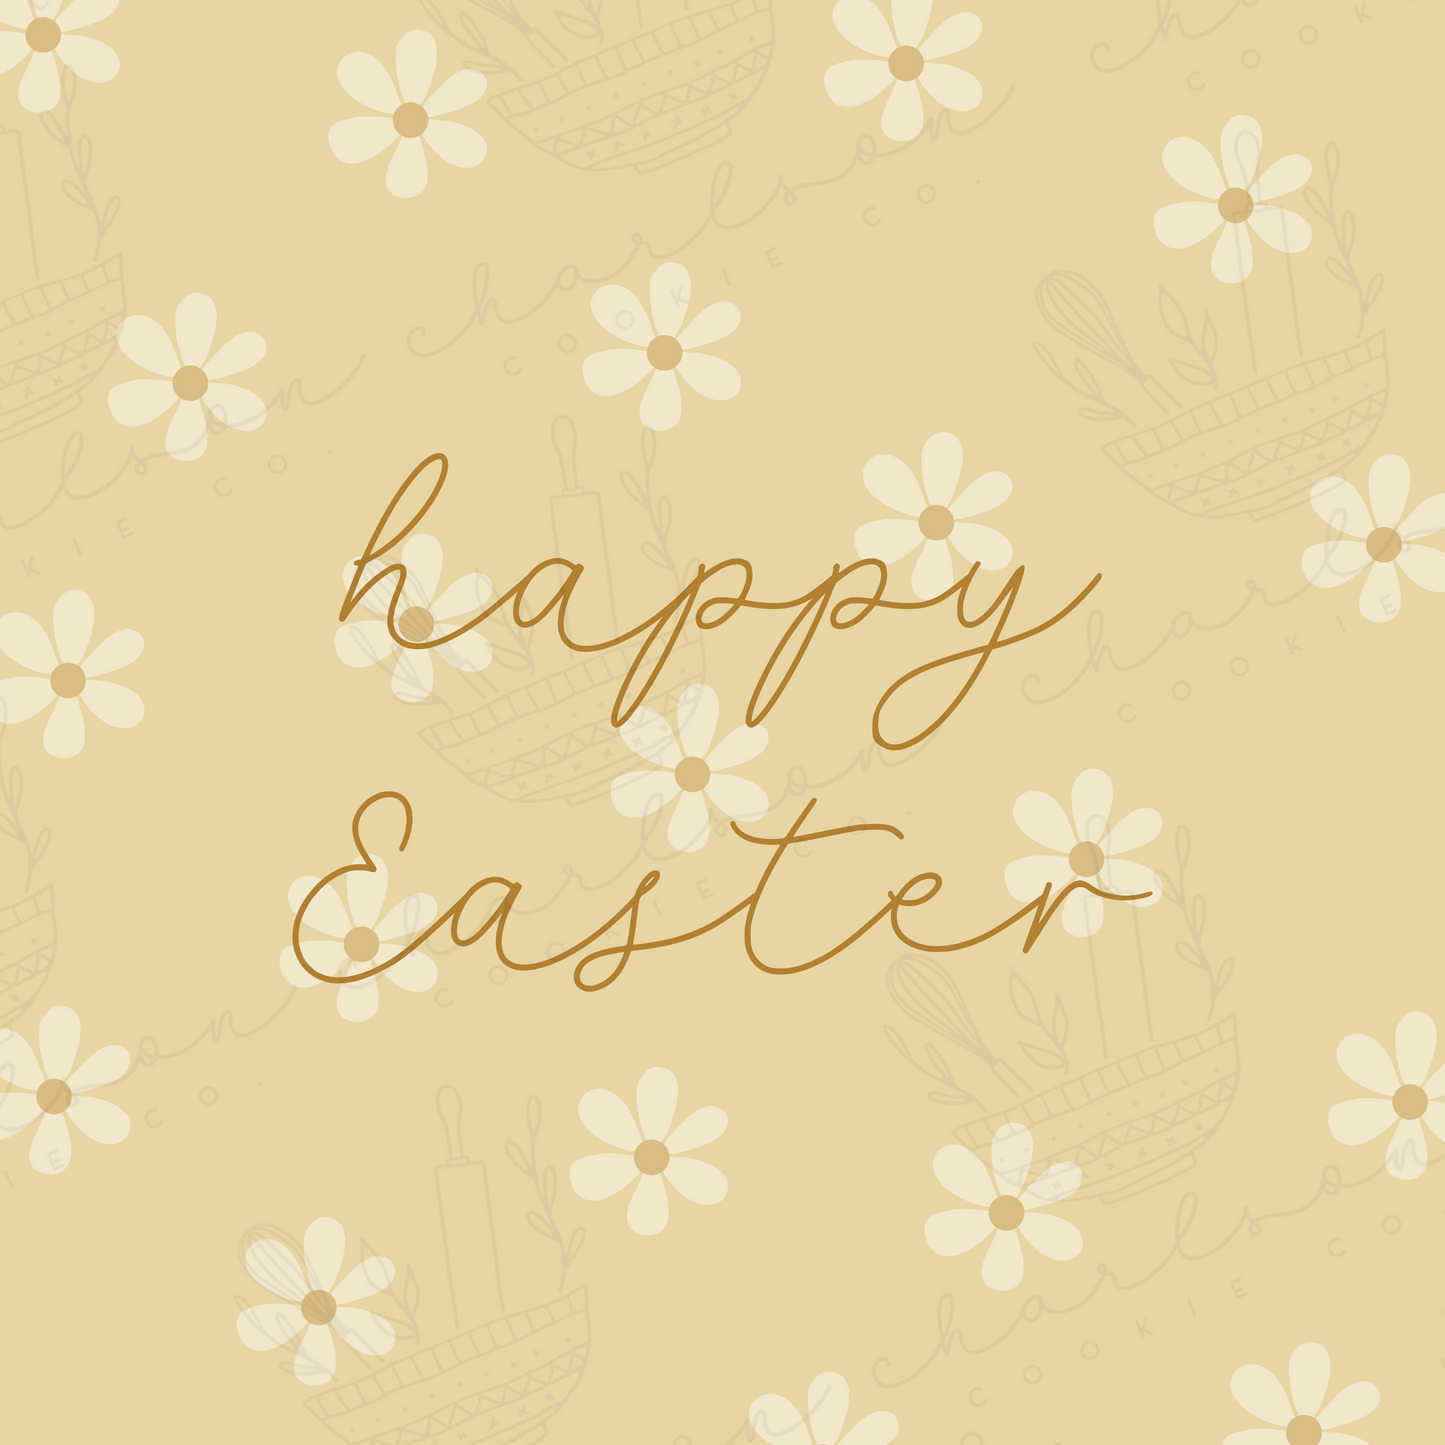 Happy easter daisy print 2"x2" templates / Instant digital download